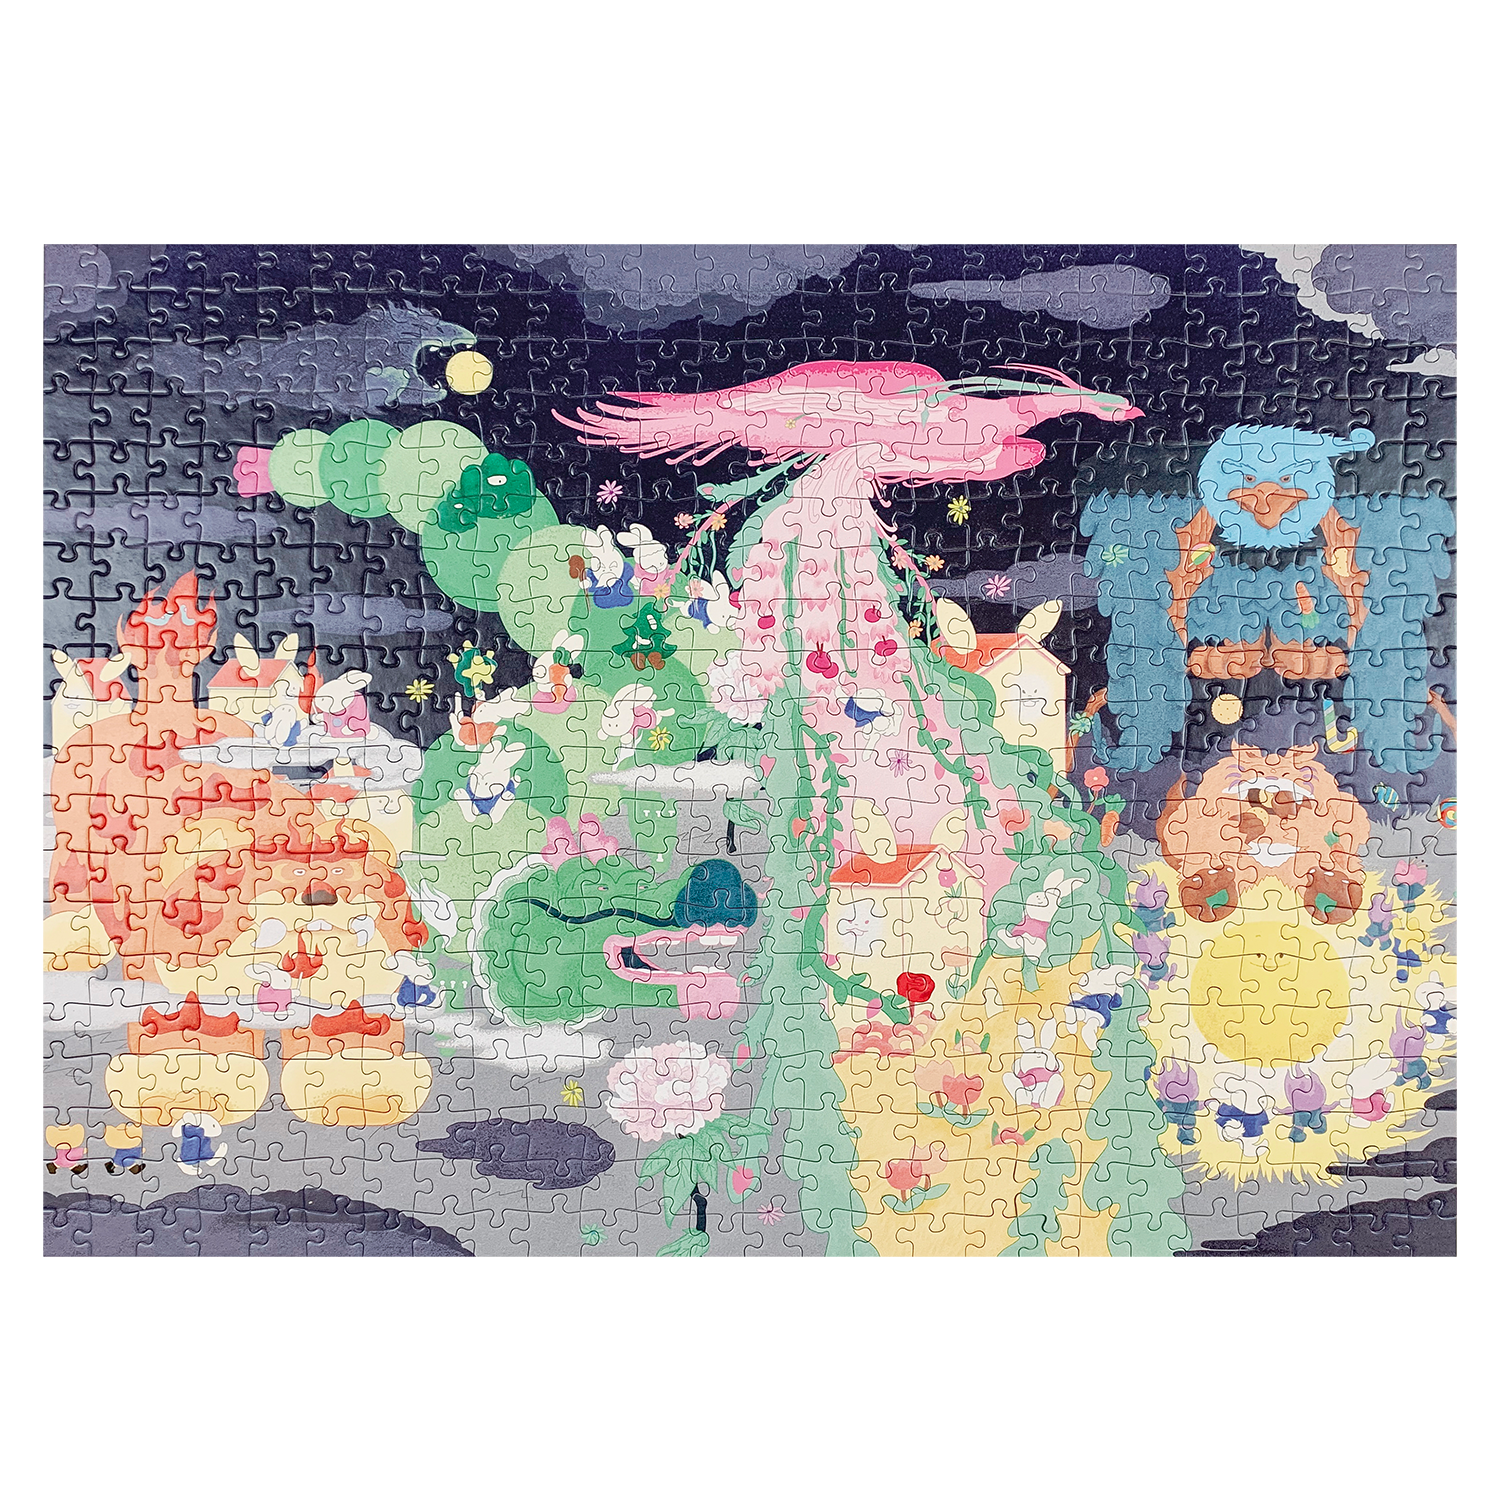 <tc>YUAN online exclusive "beast wishes" puzzle 520 pieces</tc>